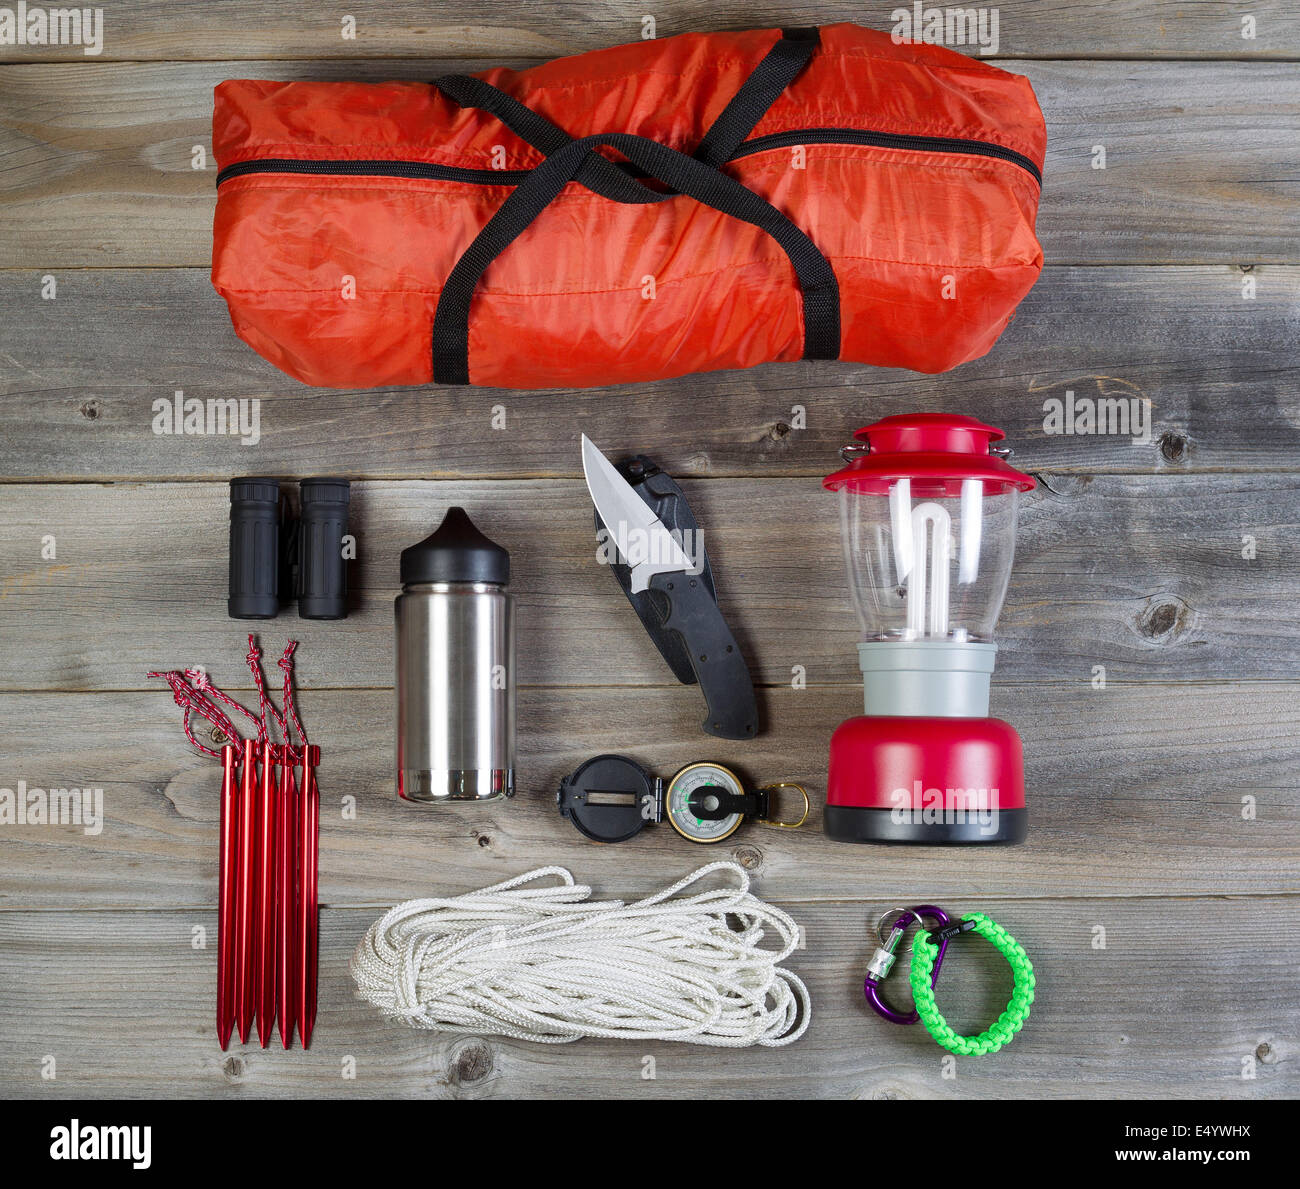 Overhead view of basic hiking gear placed on weathered wooden